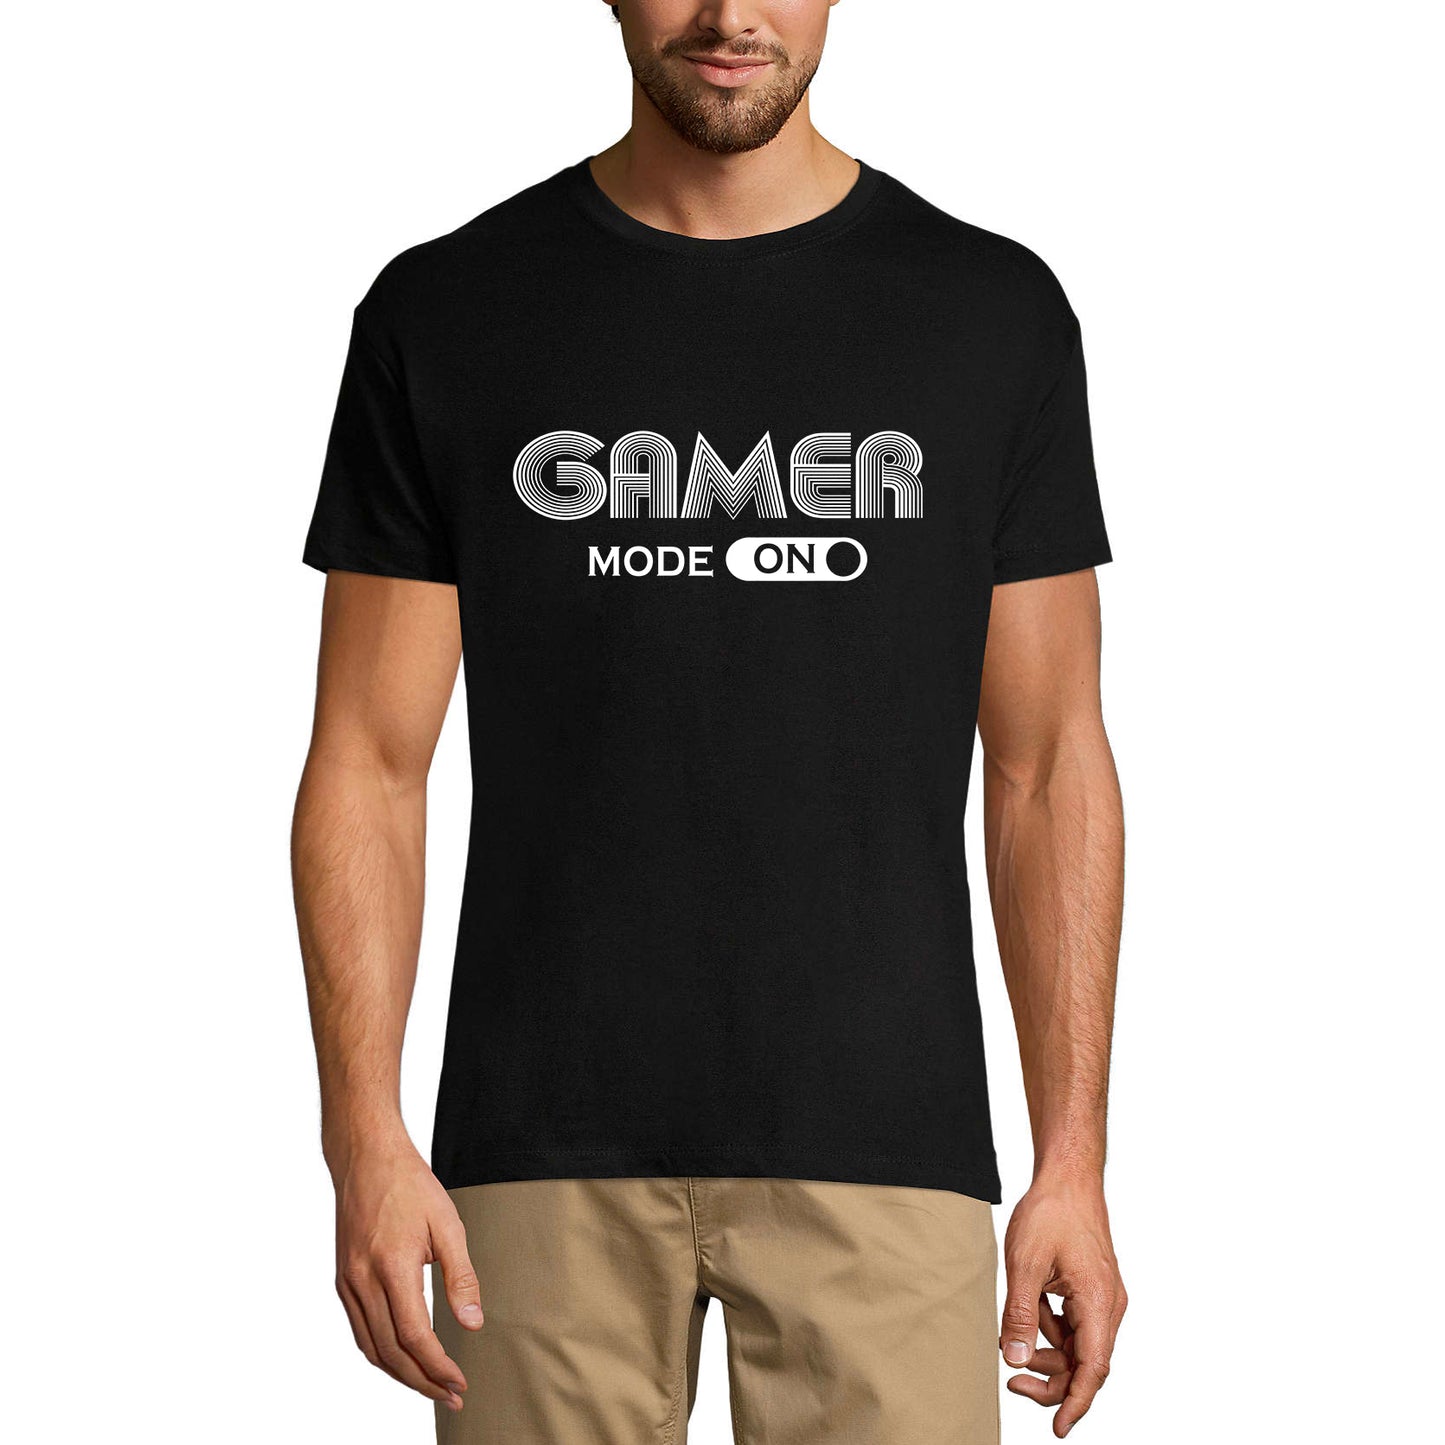 ULTRABASIC Men's Graphic T-Shirt Gamer Mode On - Gaming Shirt for Player mode on level up dad gamer i paused my game alien player ufo playstation tee shirt clothes gaming apparel gifts super mario nintendo call of duty graphic tshirt video game funny geek gift for the gamer fortnite pubg humor son father birthday